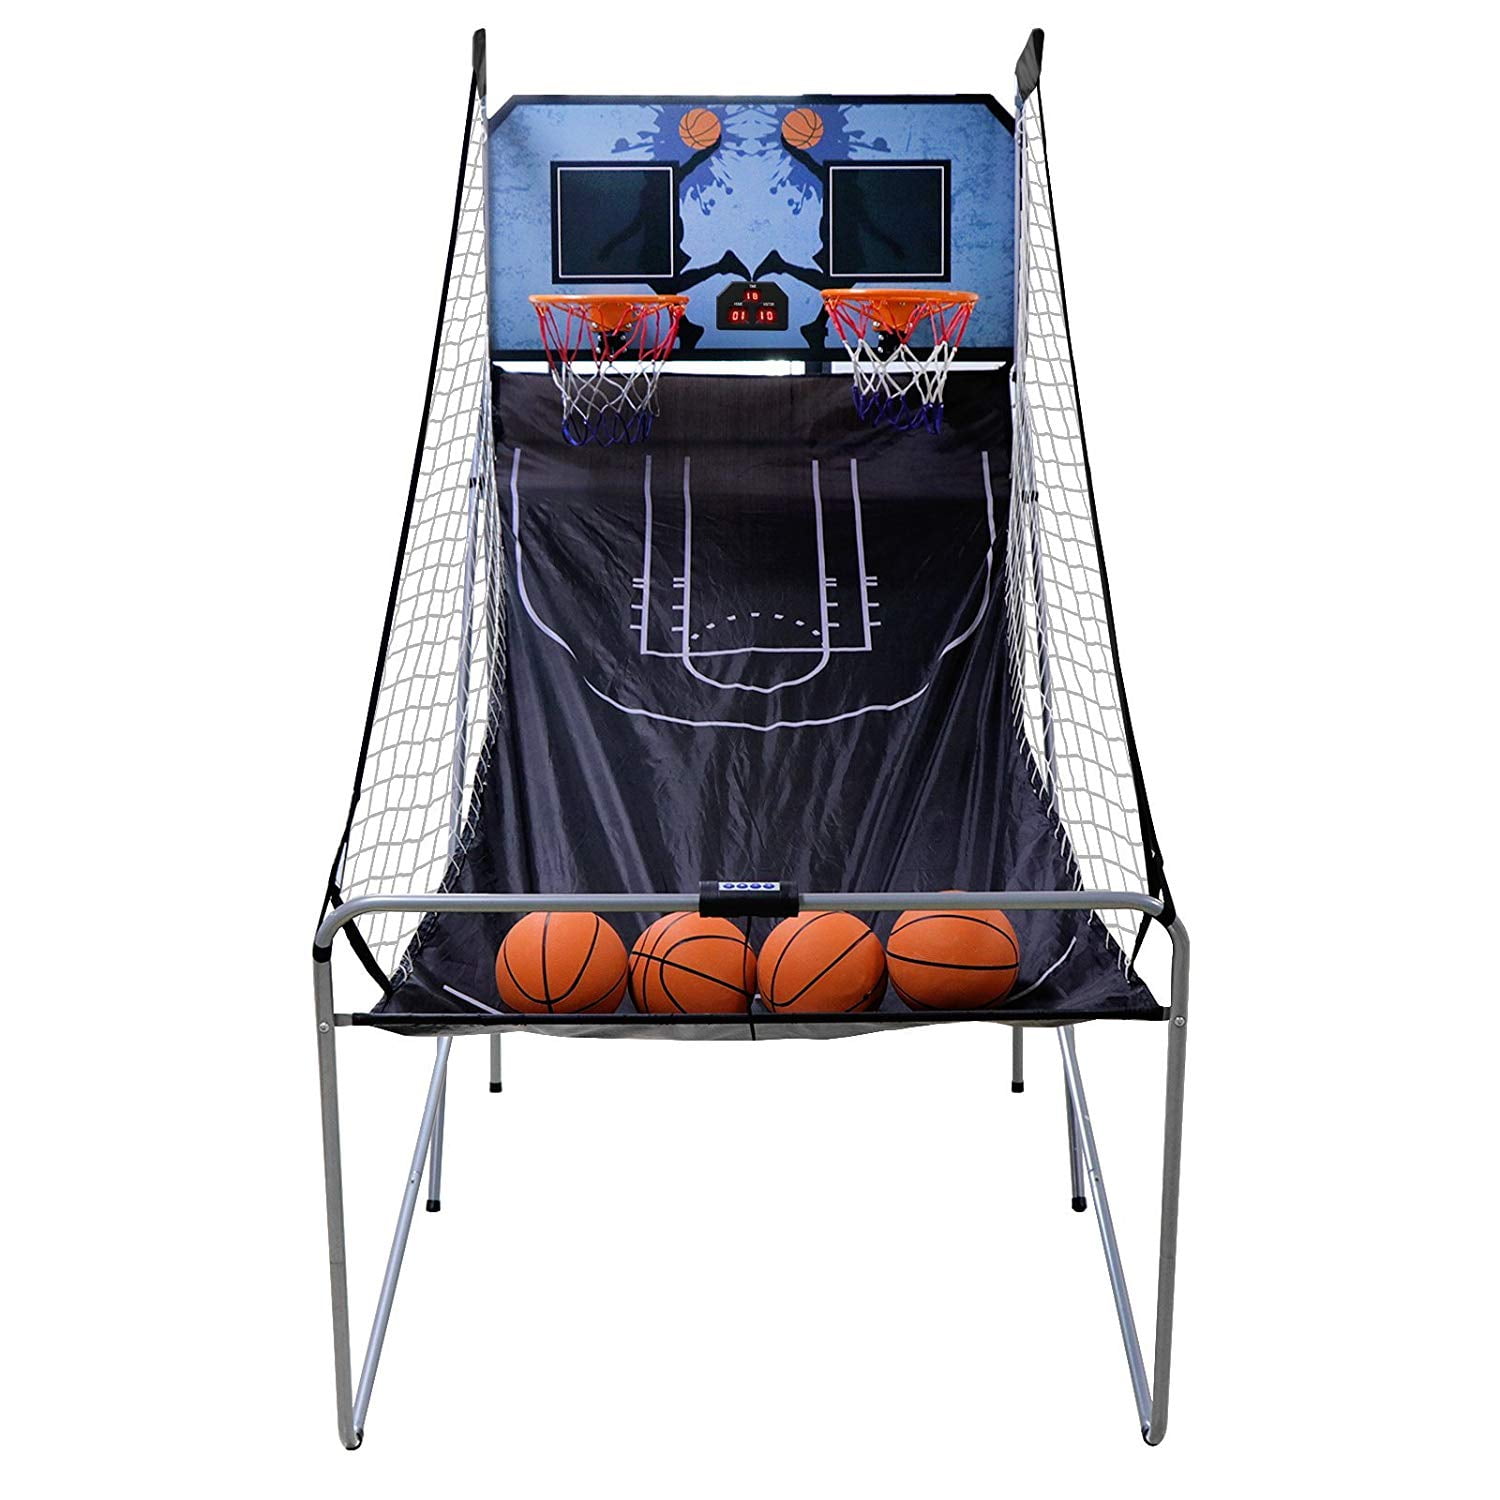 MD Sports 2-Player Basketball Game w/ 8 Game Options 4 B.Balls All Accessories